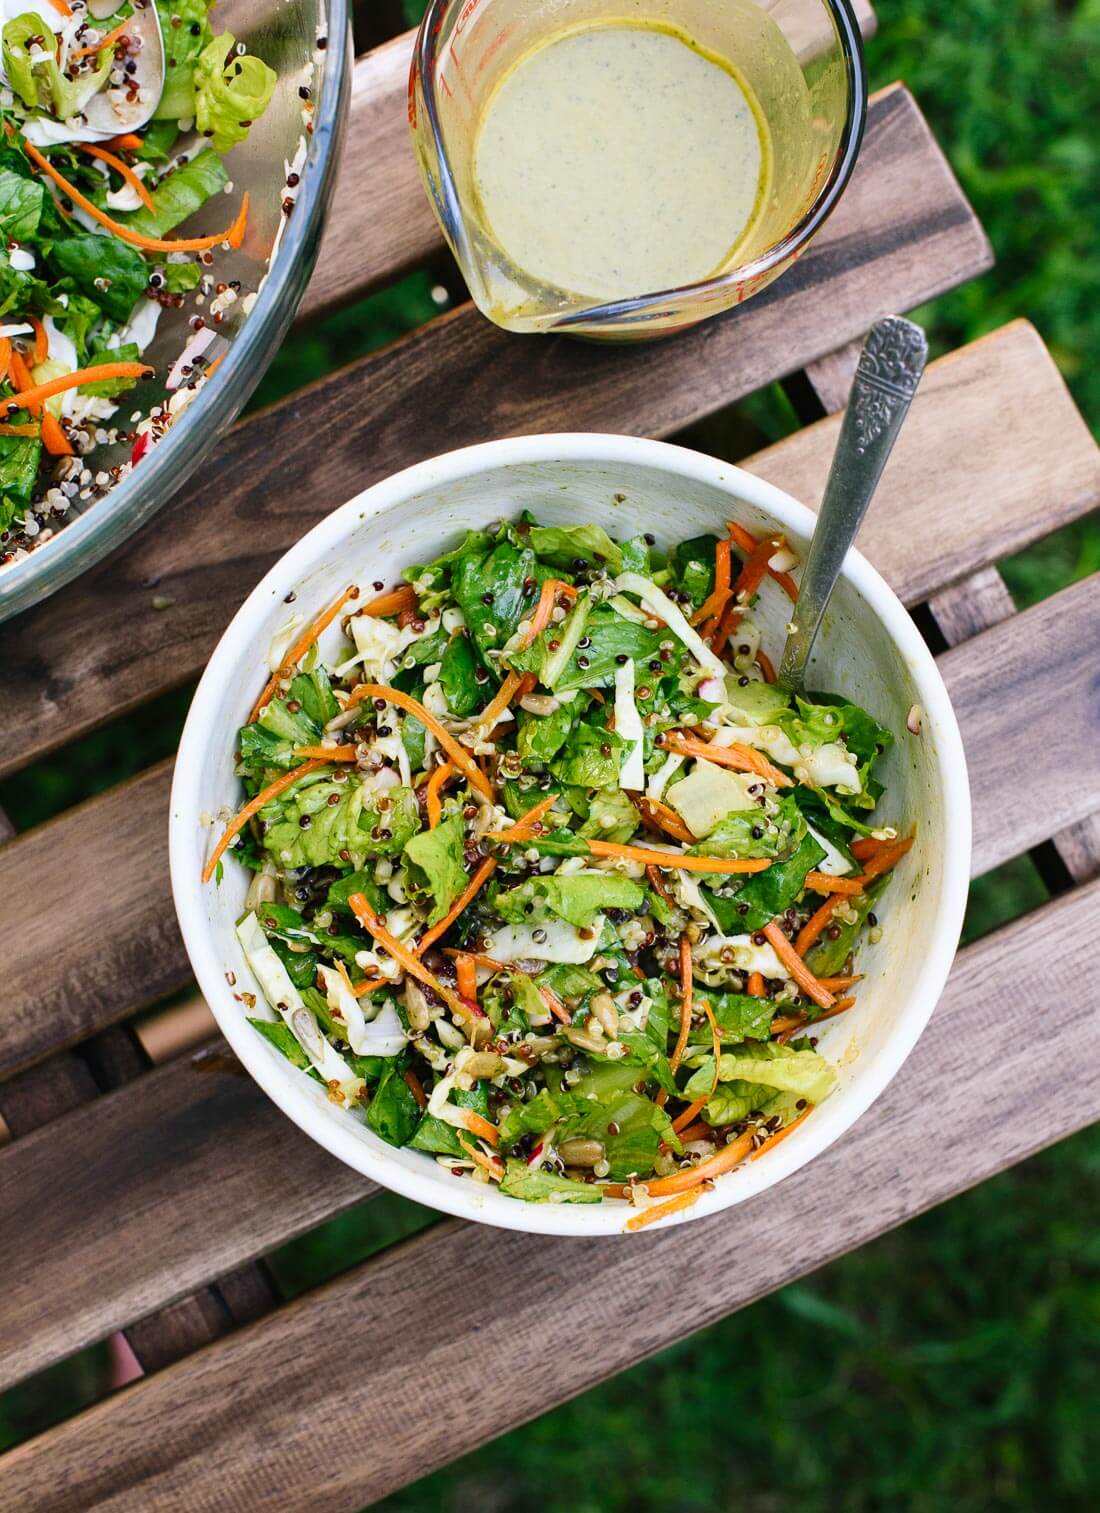 This mega crunchy salad is super healthy and totally irresistible! Vegan and gluten free. cookieandkate.com